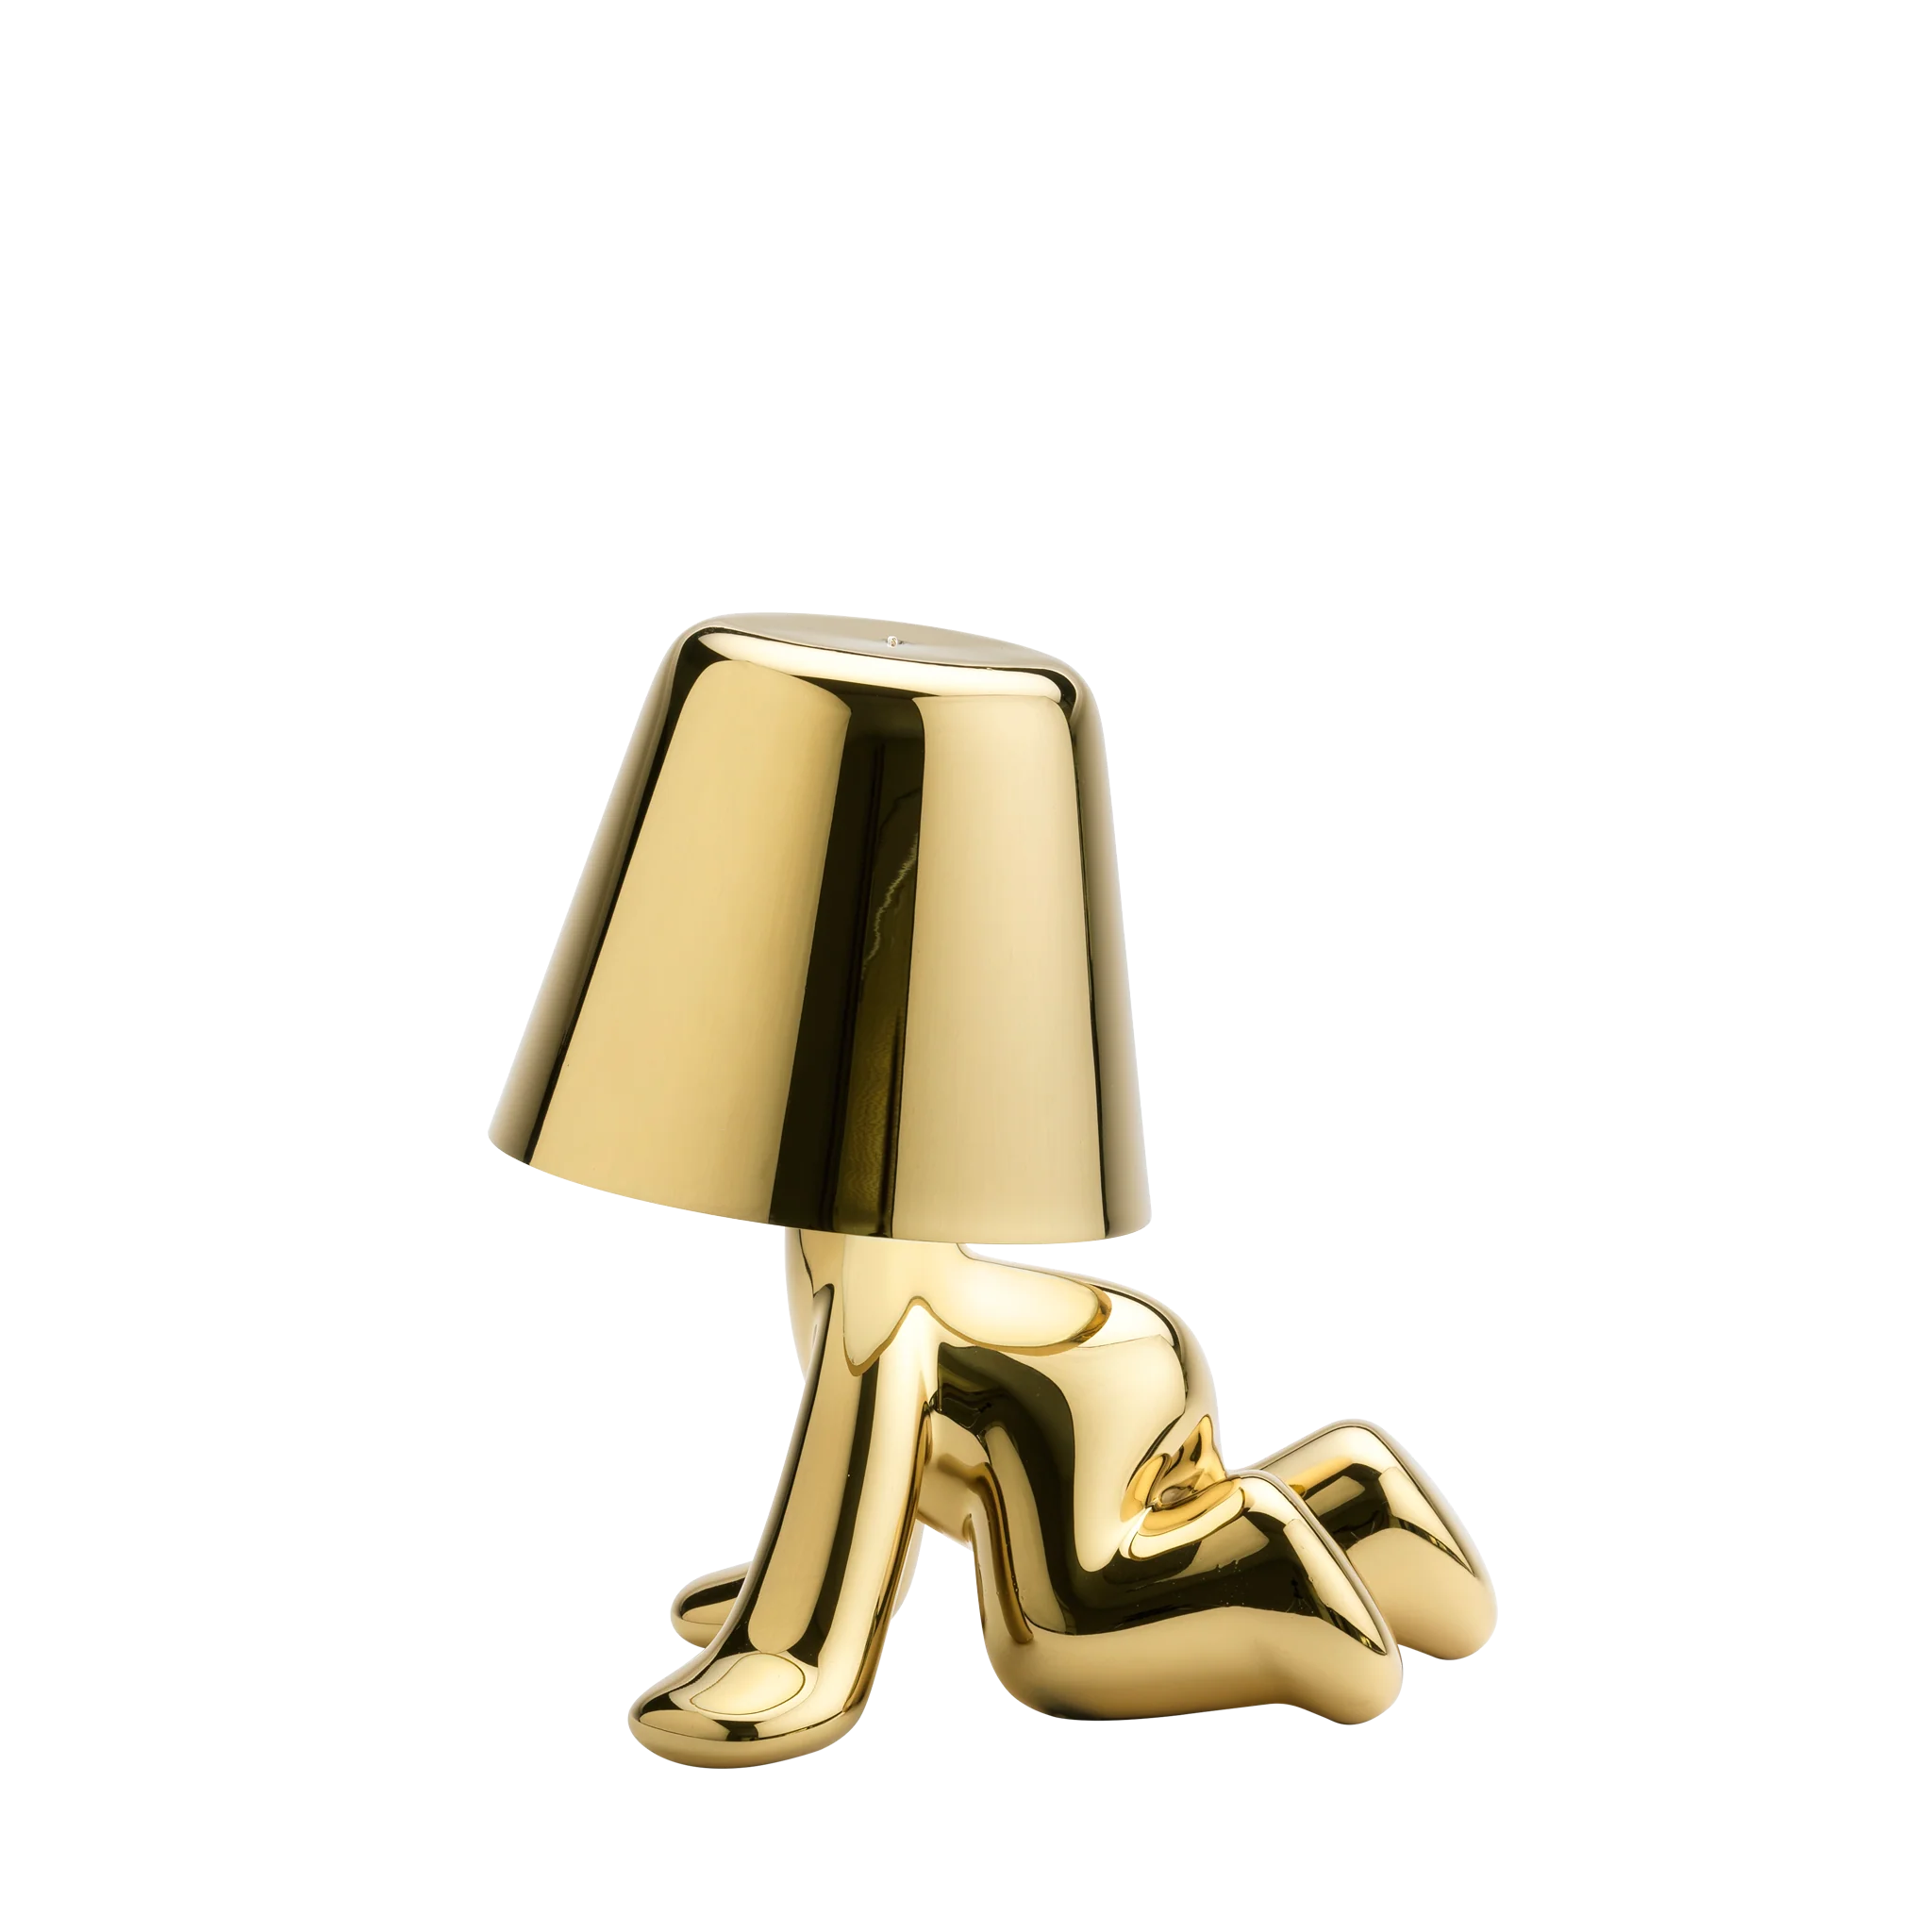 Qeeboo Golden Brothers Table Lamp